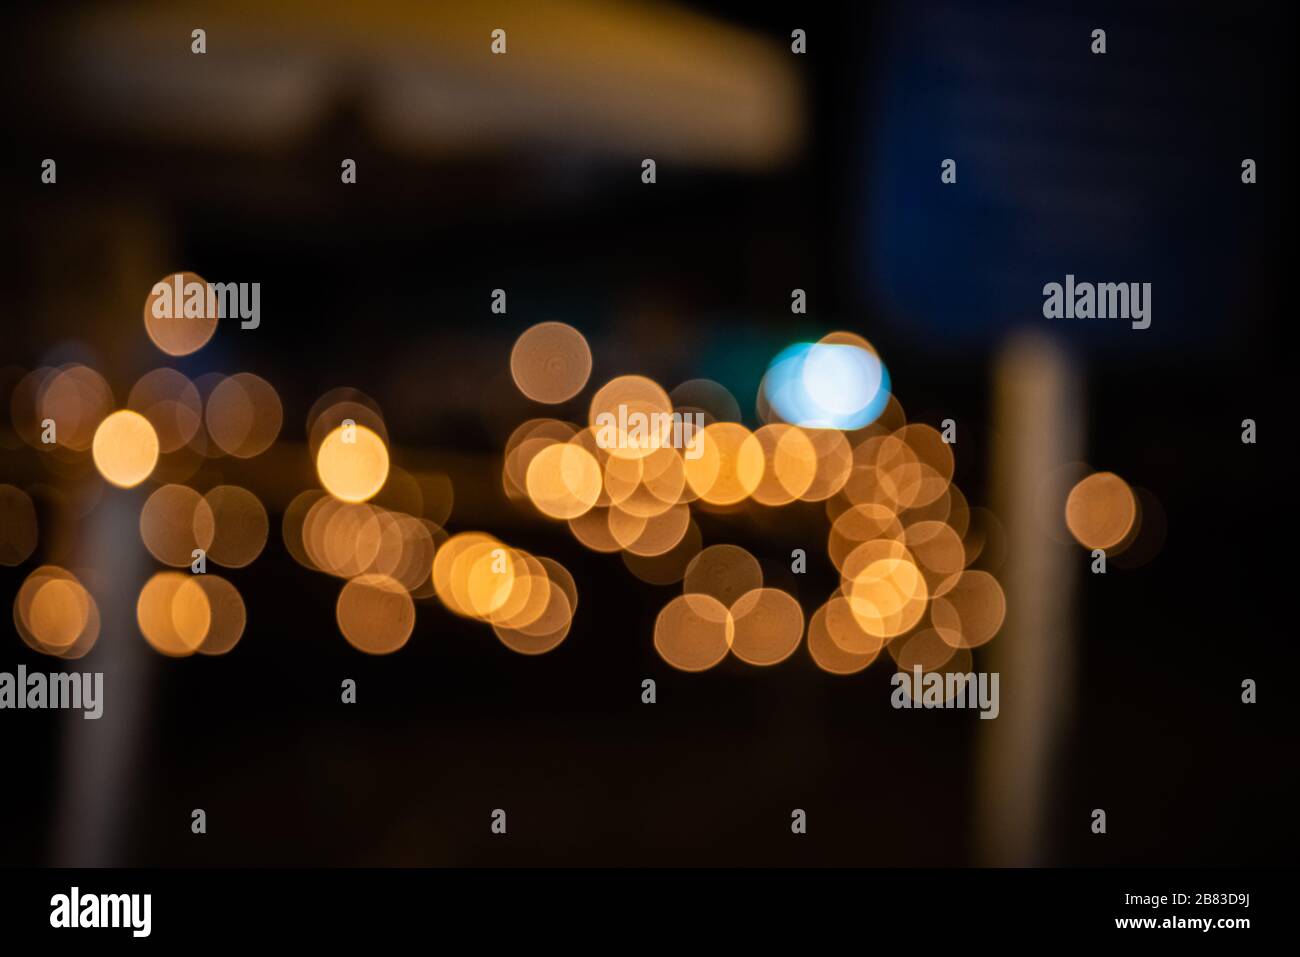 Warm window color bokeh circles of light scattered celebration atmosphere Stock Photo